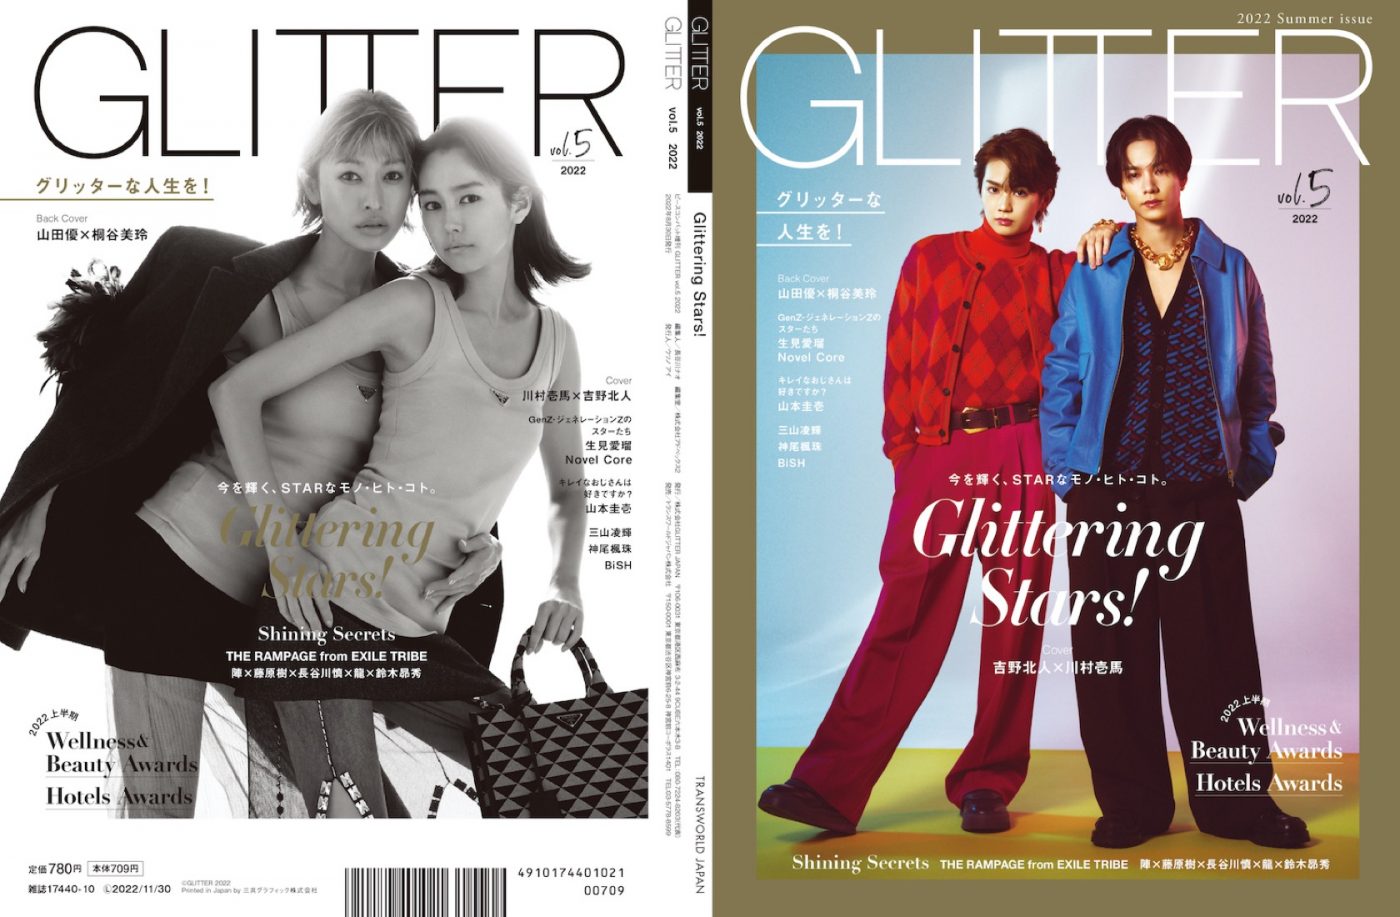 THE RAMPAGE・川村壱馬×吉野北人が登場！『GLITTER vol.5』表紙公開 – 画像一覧（2/2） – THE FIRST TIMES